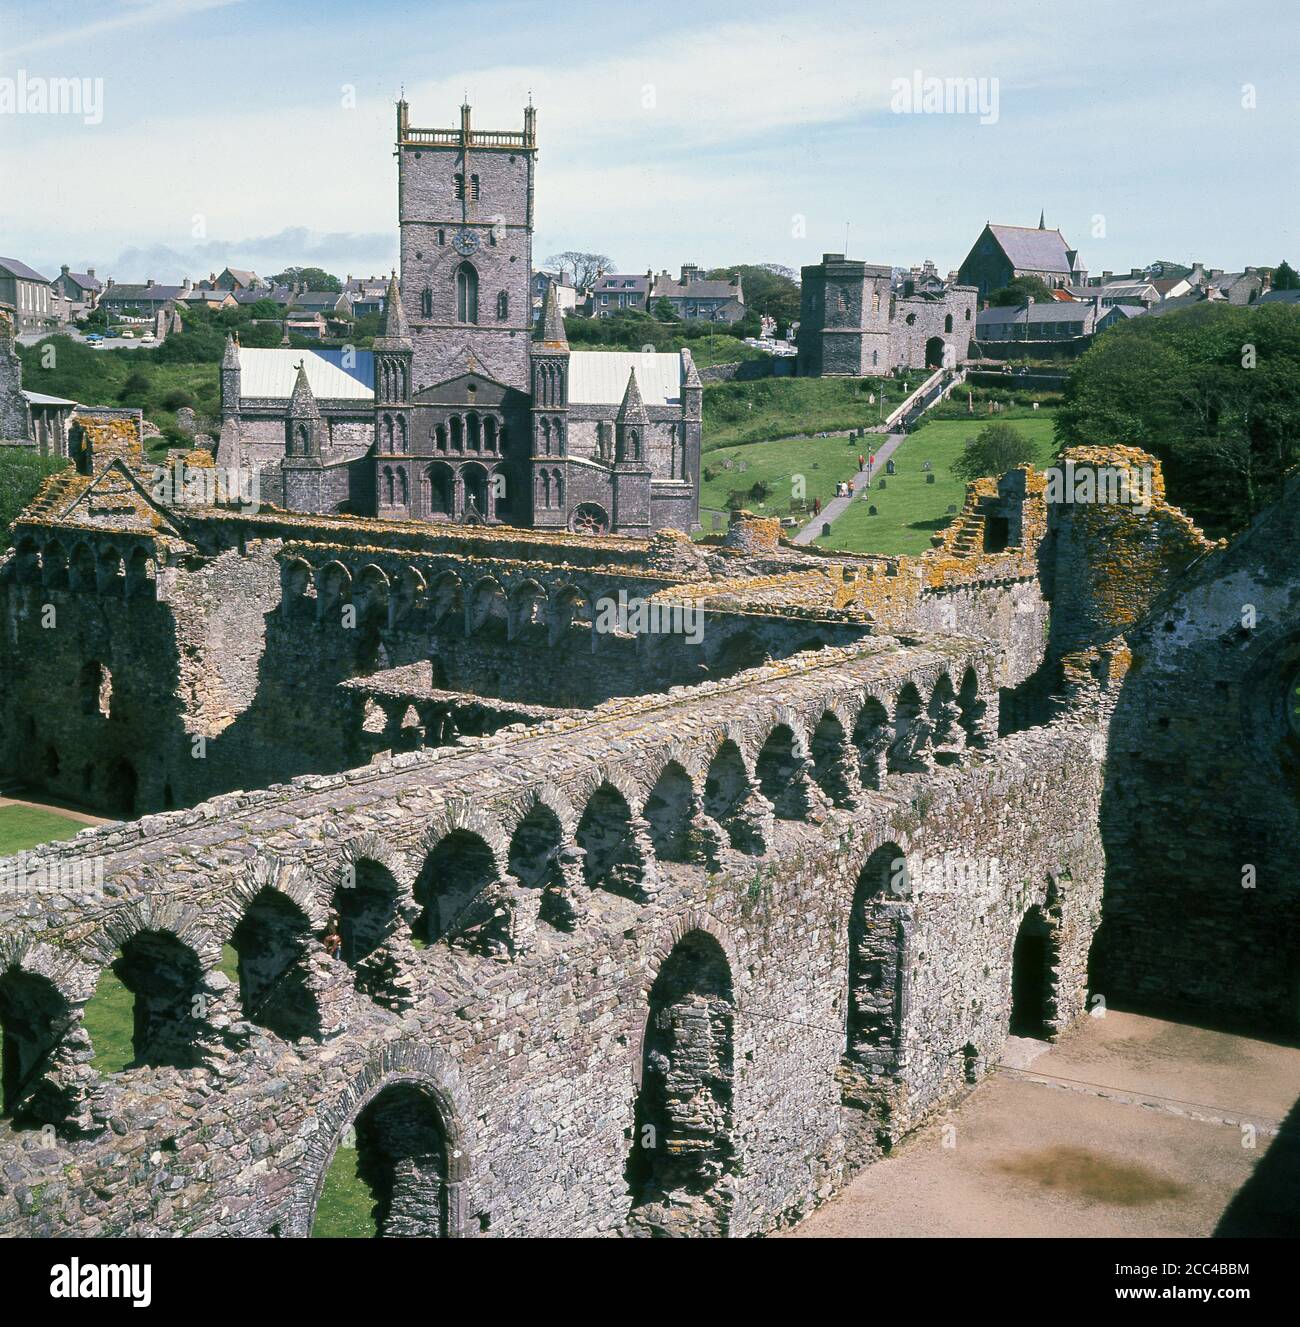 1960s, historical, a view from this era over anicent buildings towards the Cathedral Church of St Andrew and St David, at The Pebbles, St David's, Haverfordwest in Wales, The parton saint of Wales, St David, founded a monastery there in the 6th century, with the cathedral being built by a Norman Bishop in 1180. Buried there, his shrine was a popular place of pilgrimage throughout the Middle Ages.  St David's was a made a city in 1994 to mark its role in Christian heritage and is the UK's smallest city. Stock Photo